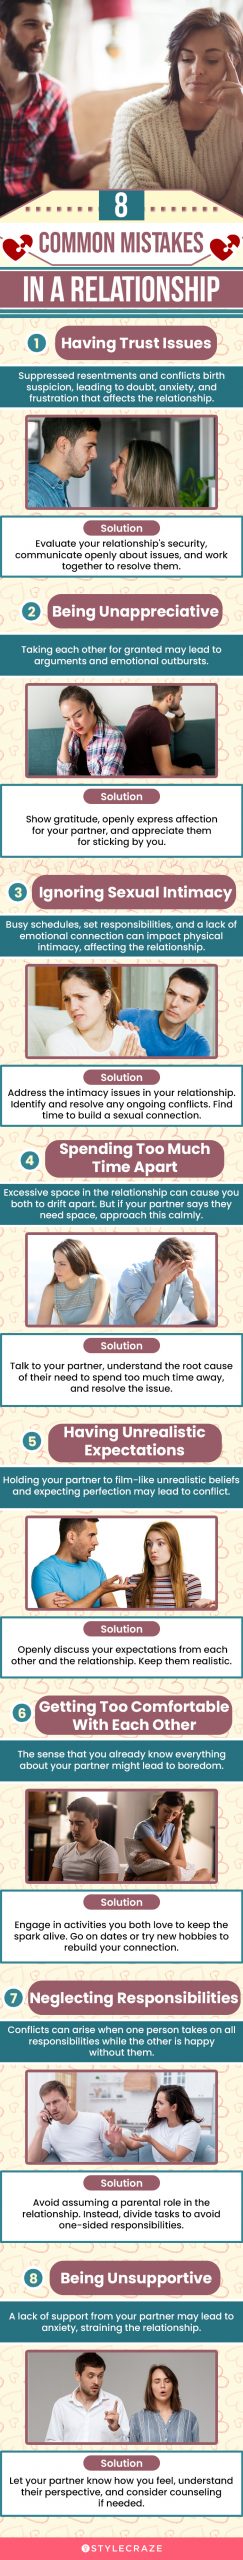 8 common mistakes in a relationship (infographic)